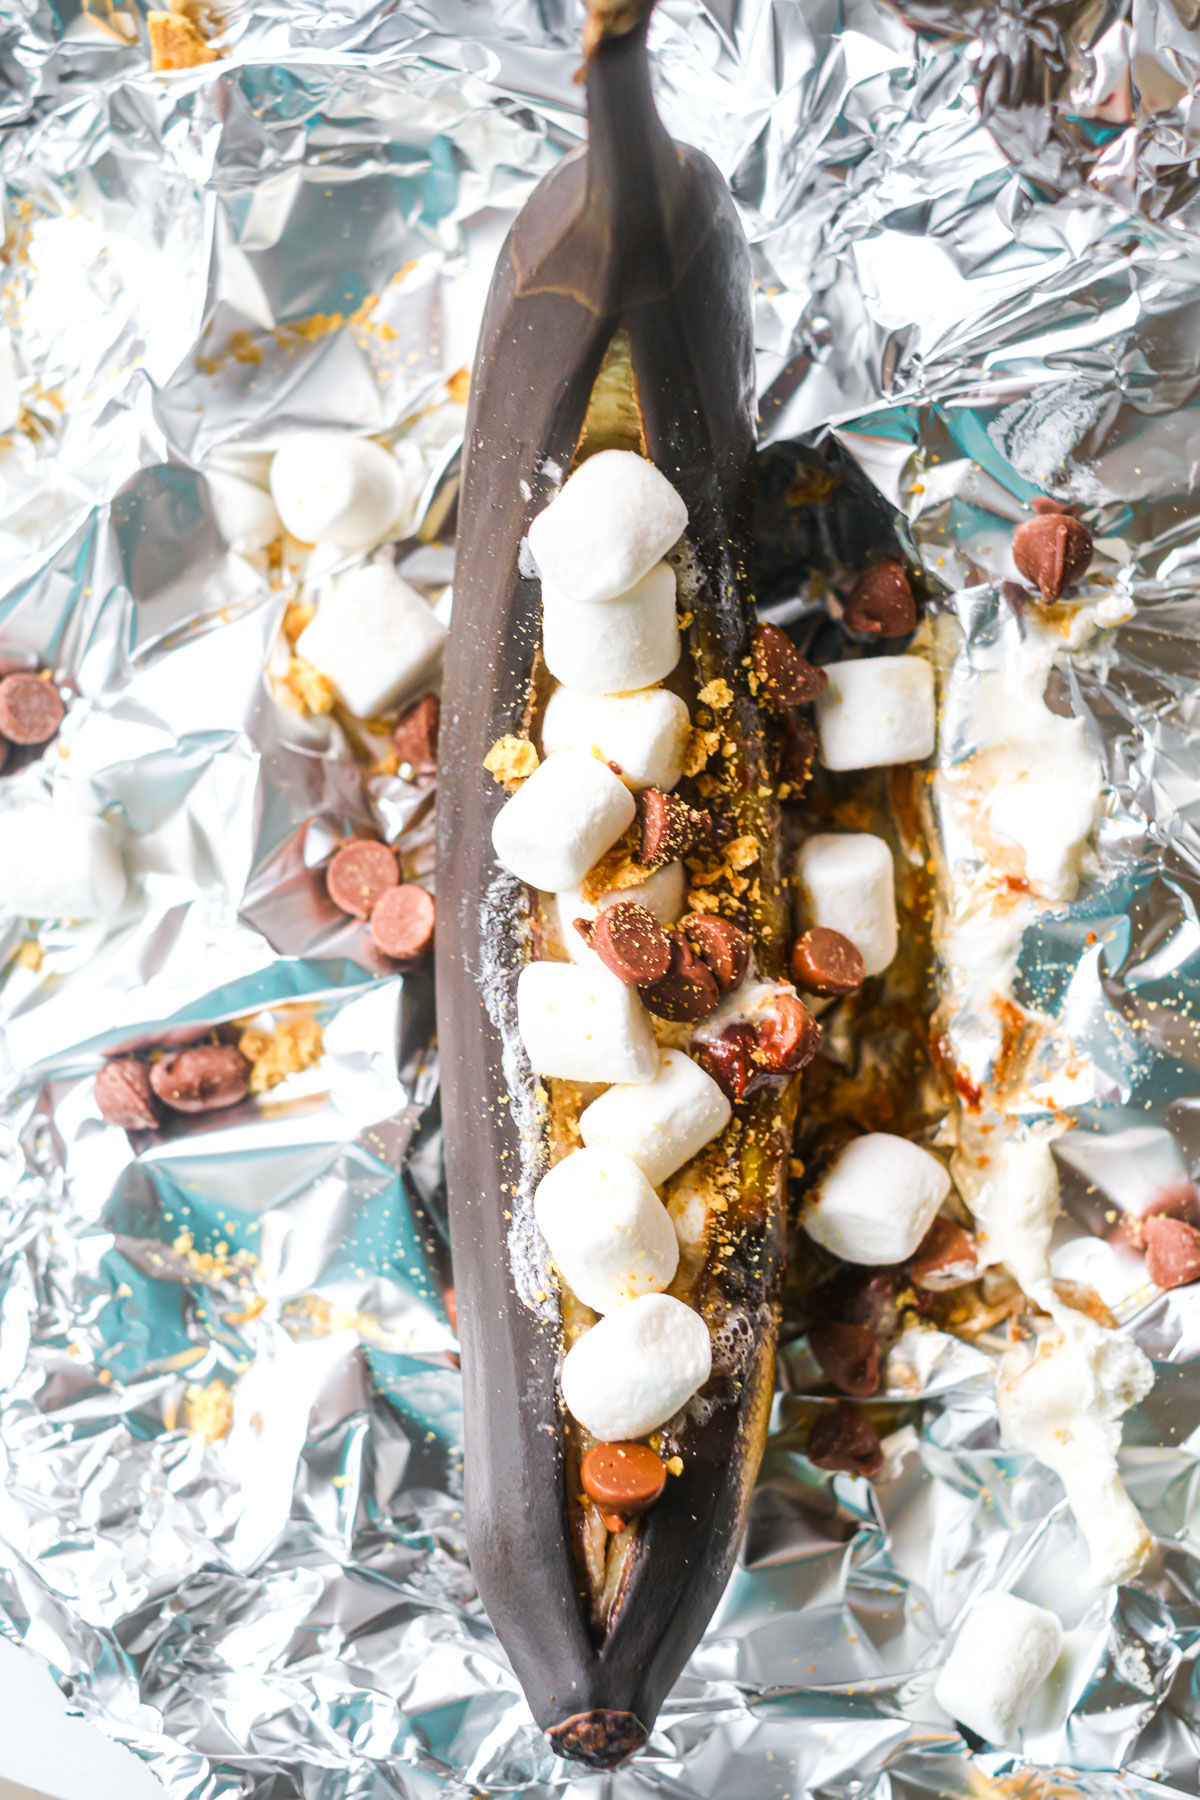 a smores banana split that has been cooked on the campfire